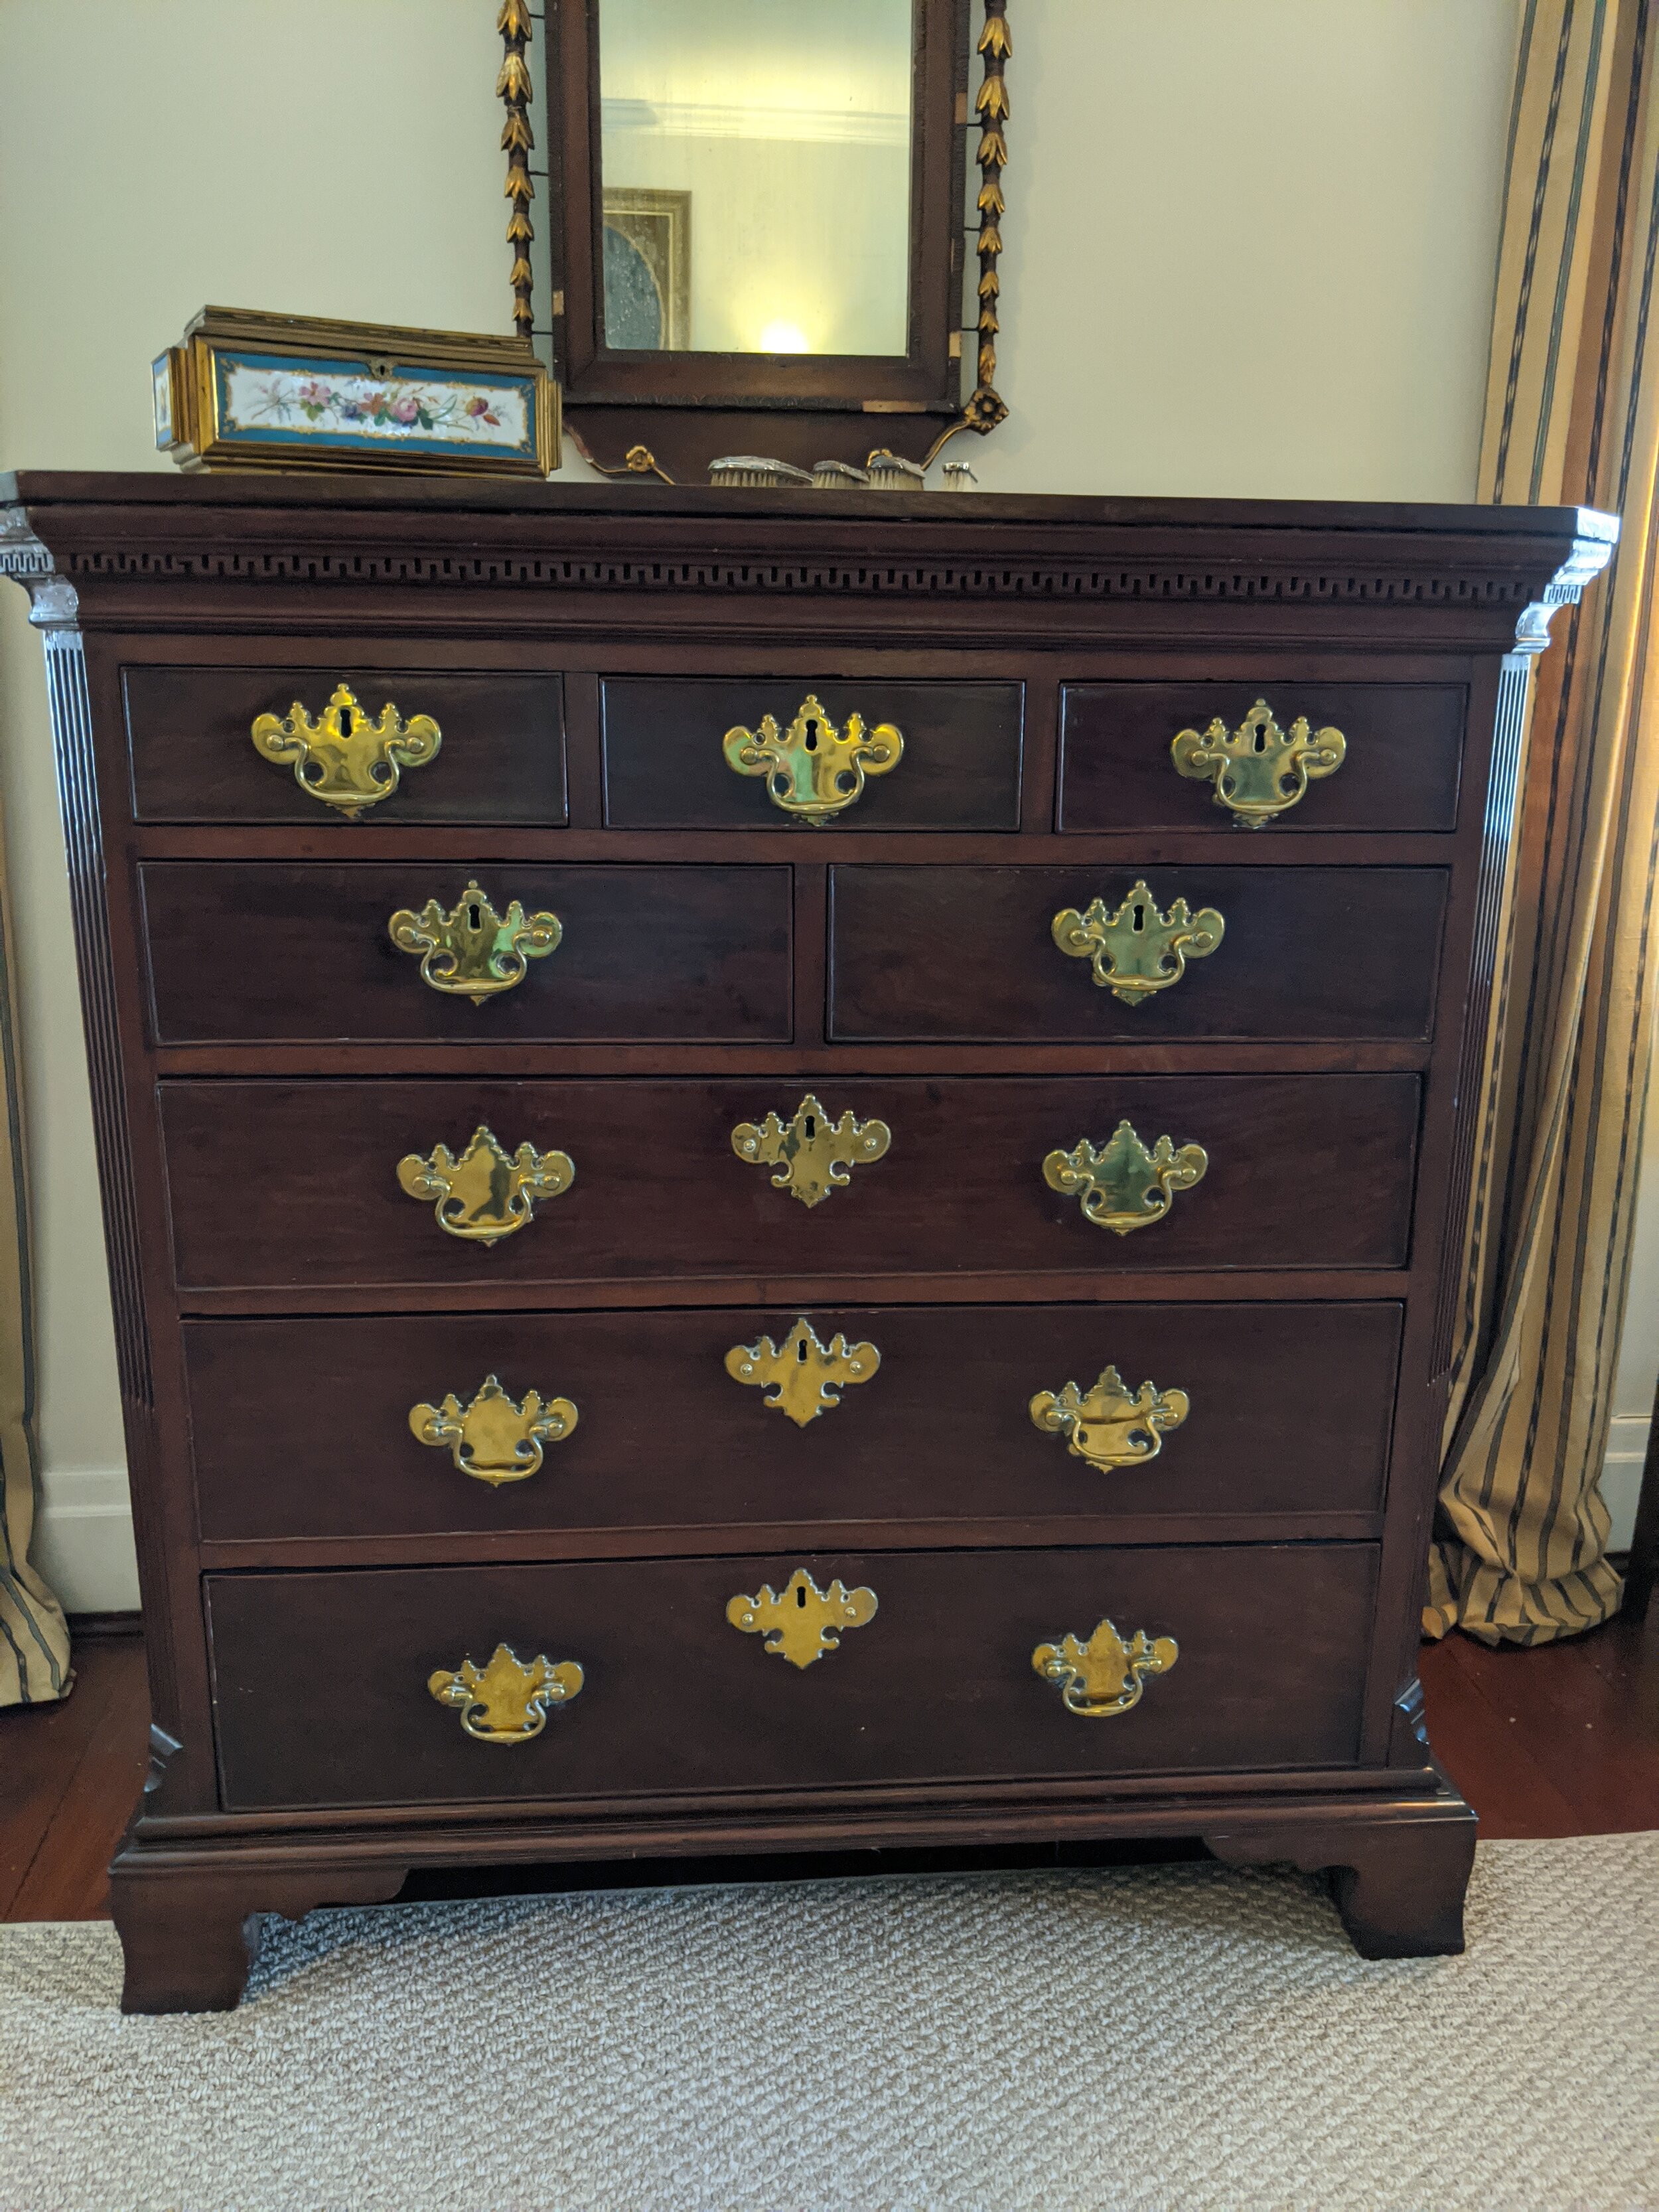 Chest of Drawers made in Charleston, SC c. 1760-1780